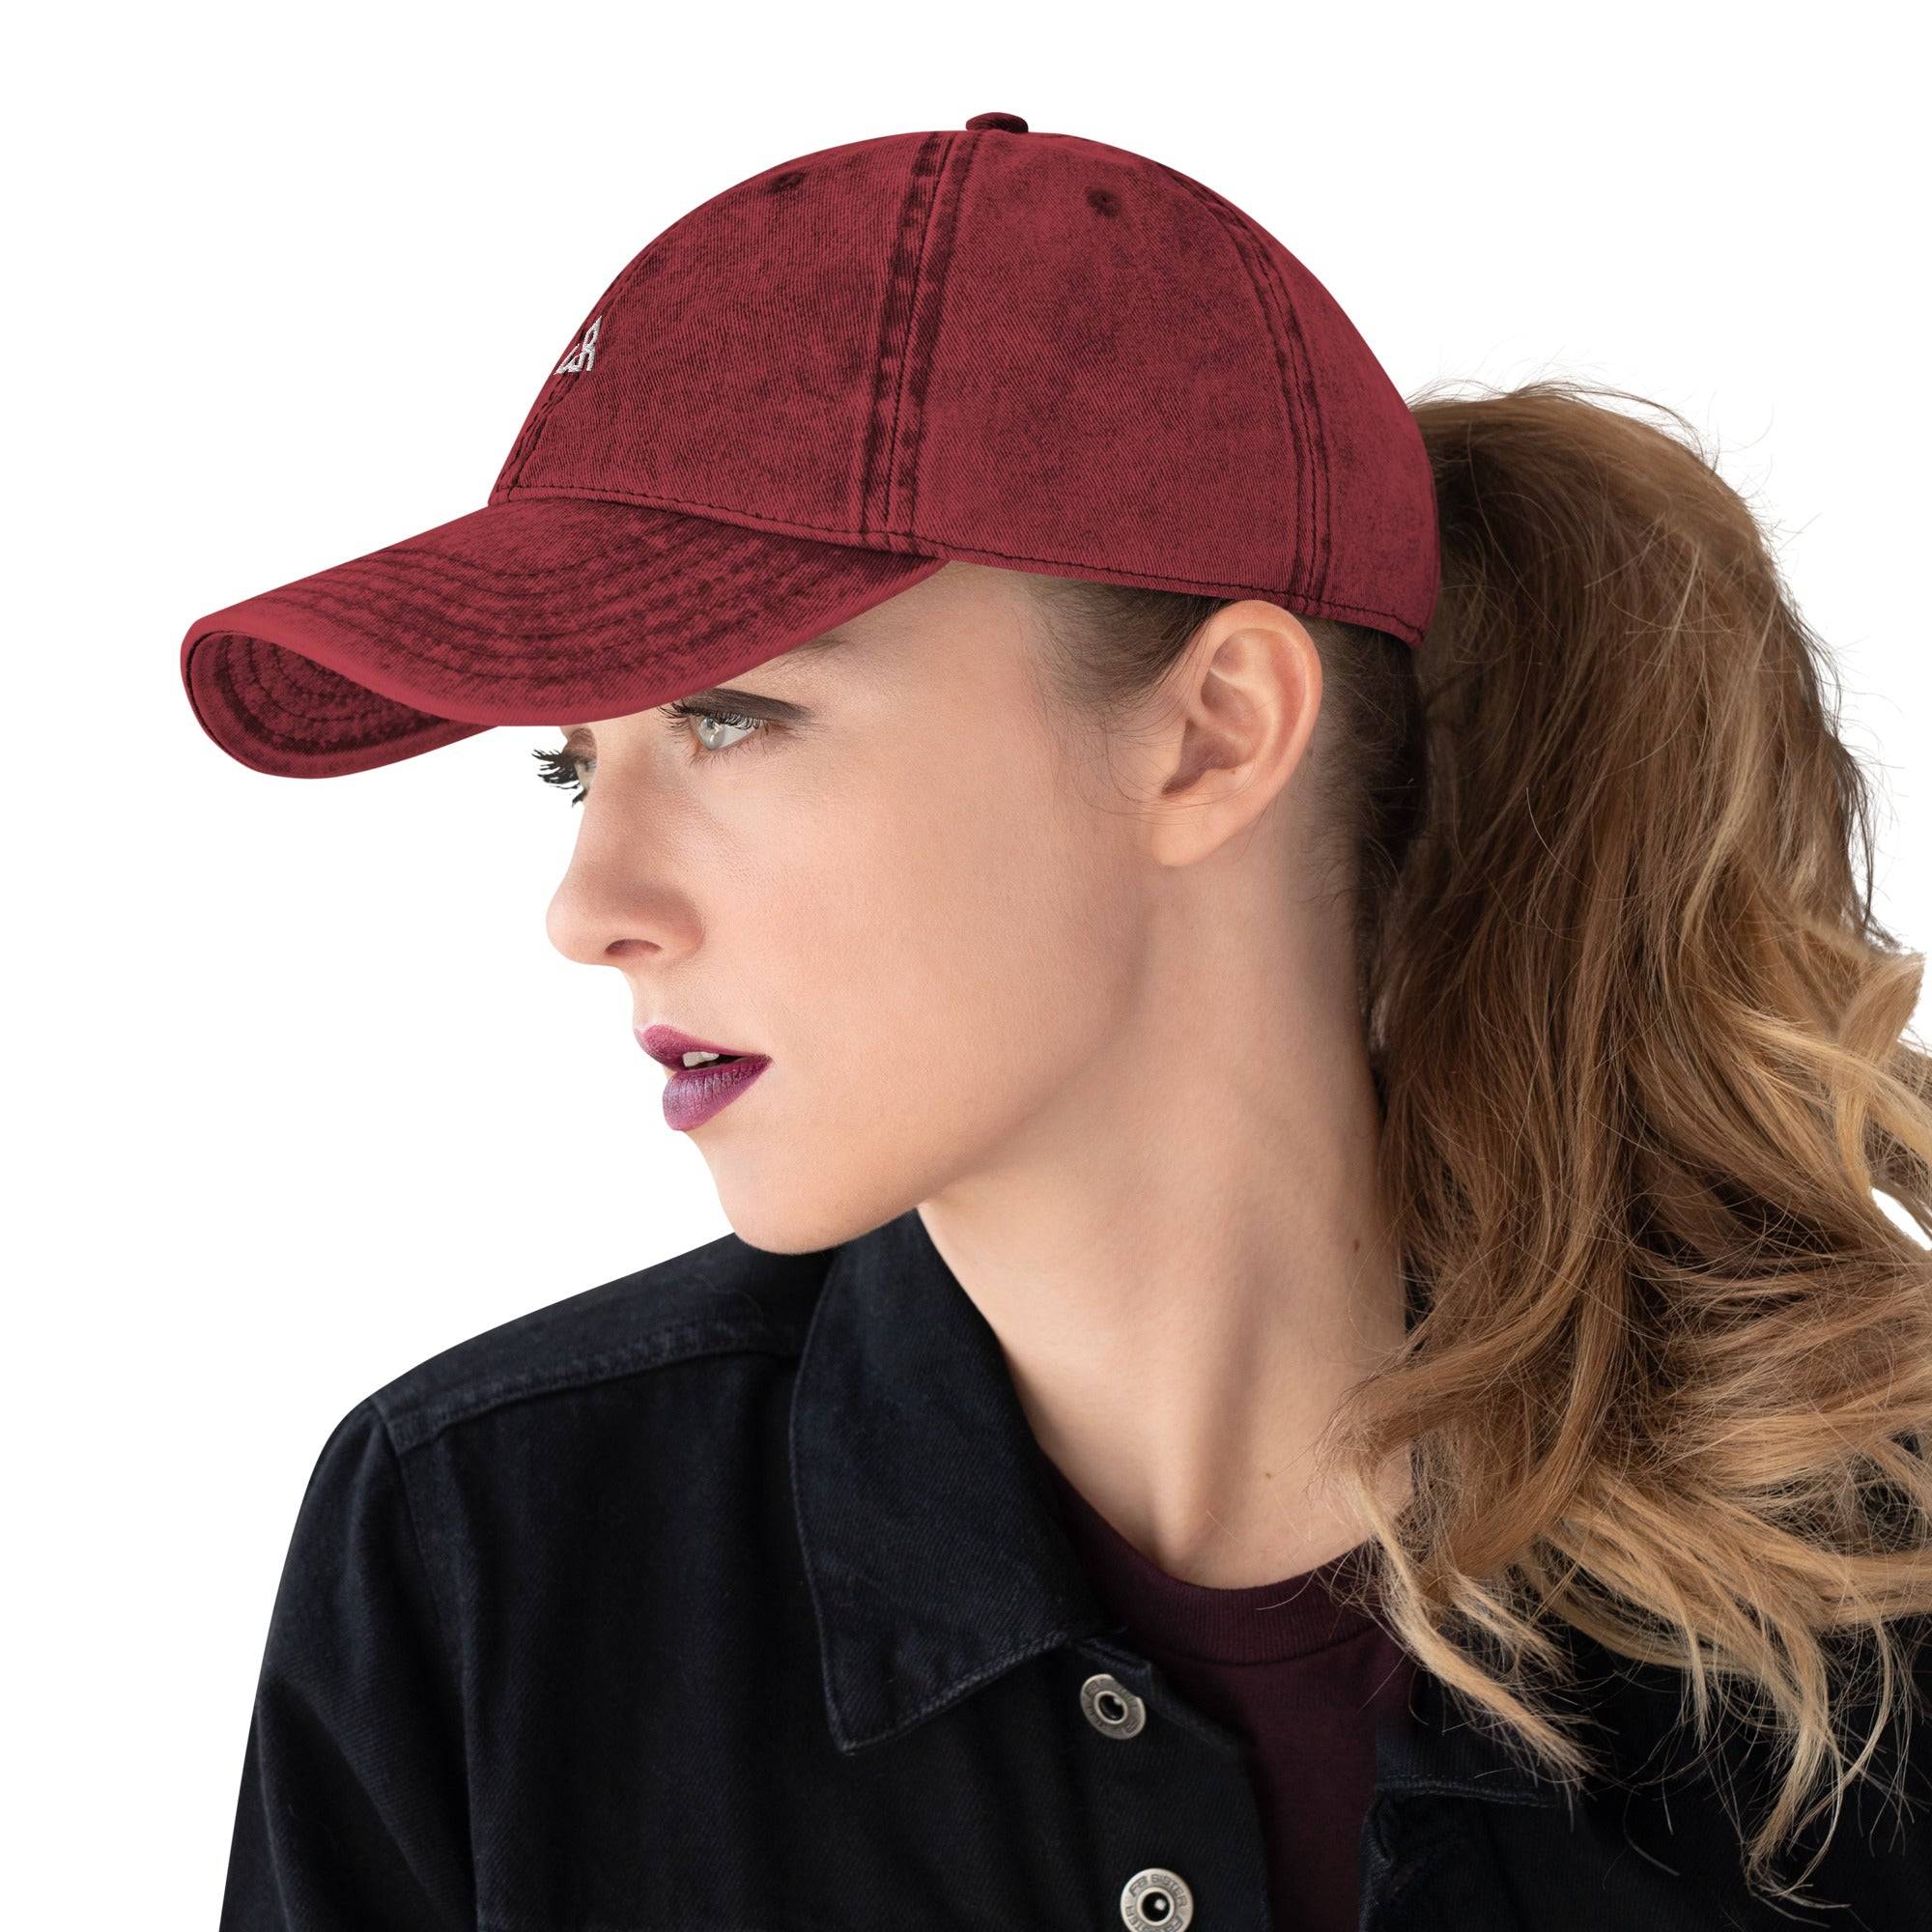 Vintage Cotton Twill Cap | Washed Out Vintage Fabric - Revive Wear     Vintage Cotton Twill Cap. Shop Summer Hats at Revive Wear for your active lifestyle and fashion accessory. Purchase your favorite Summer Hat Today.